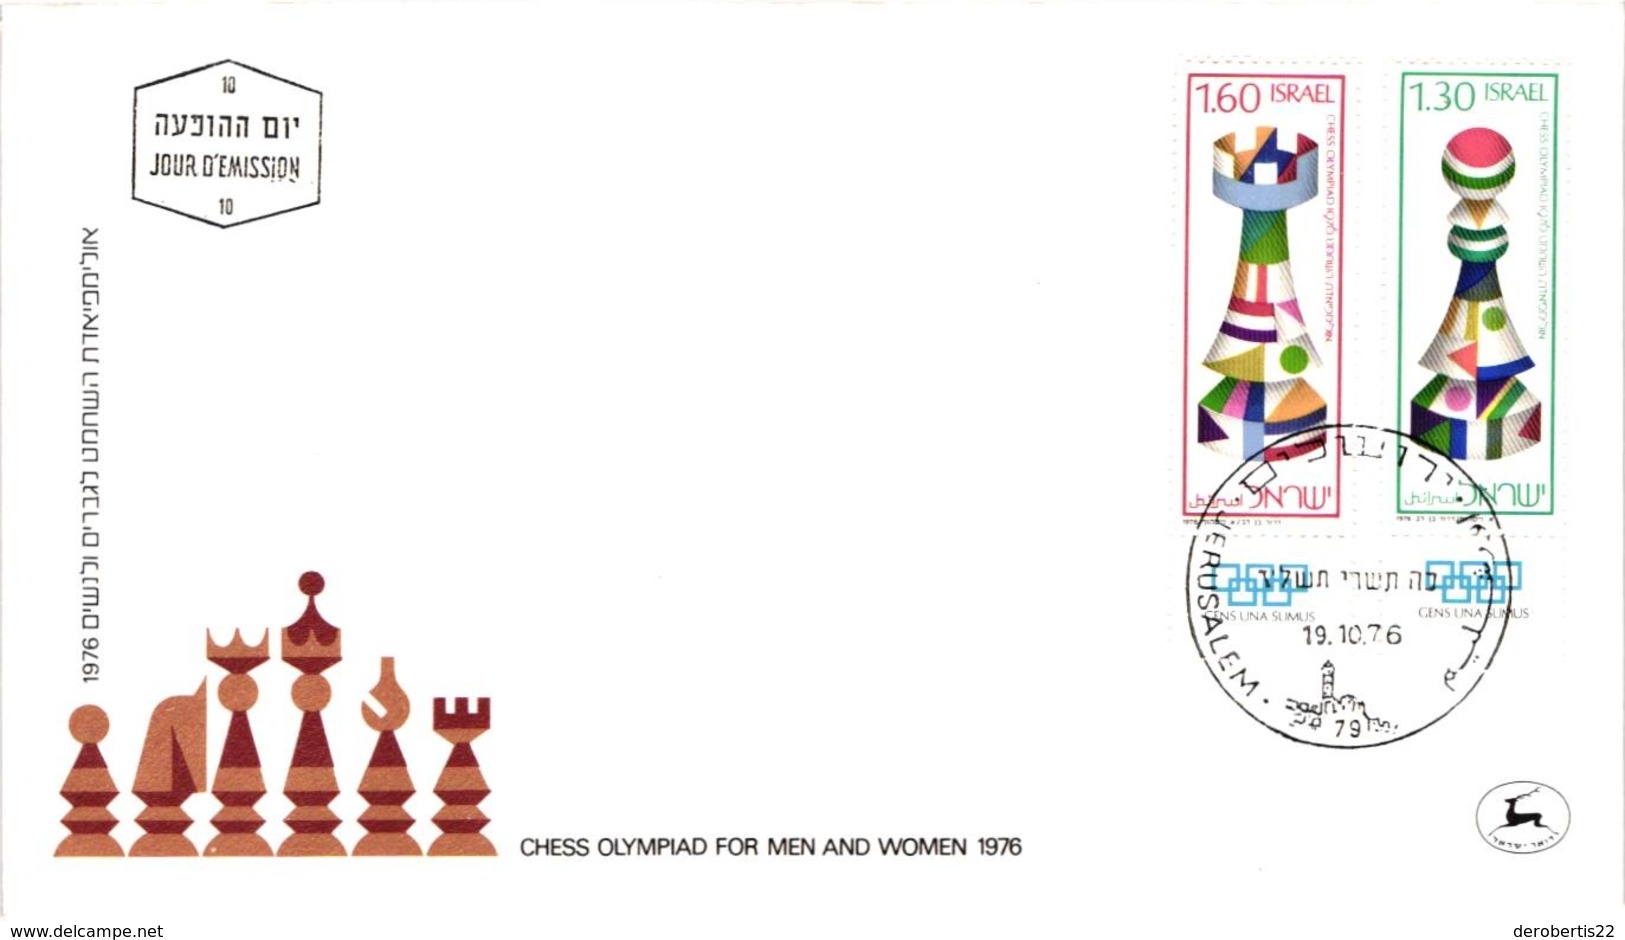 Chess Schach Echecs Ajedrez - Jerusalem. Israel 1976_Chess Olympiad For Men And Women_FDC CKM 551 - Schach